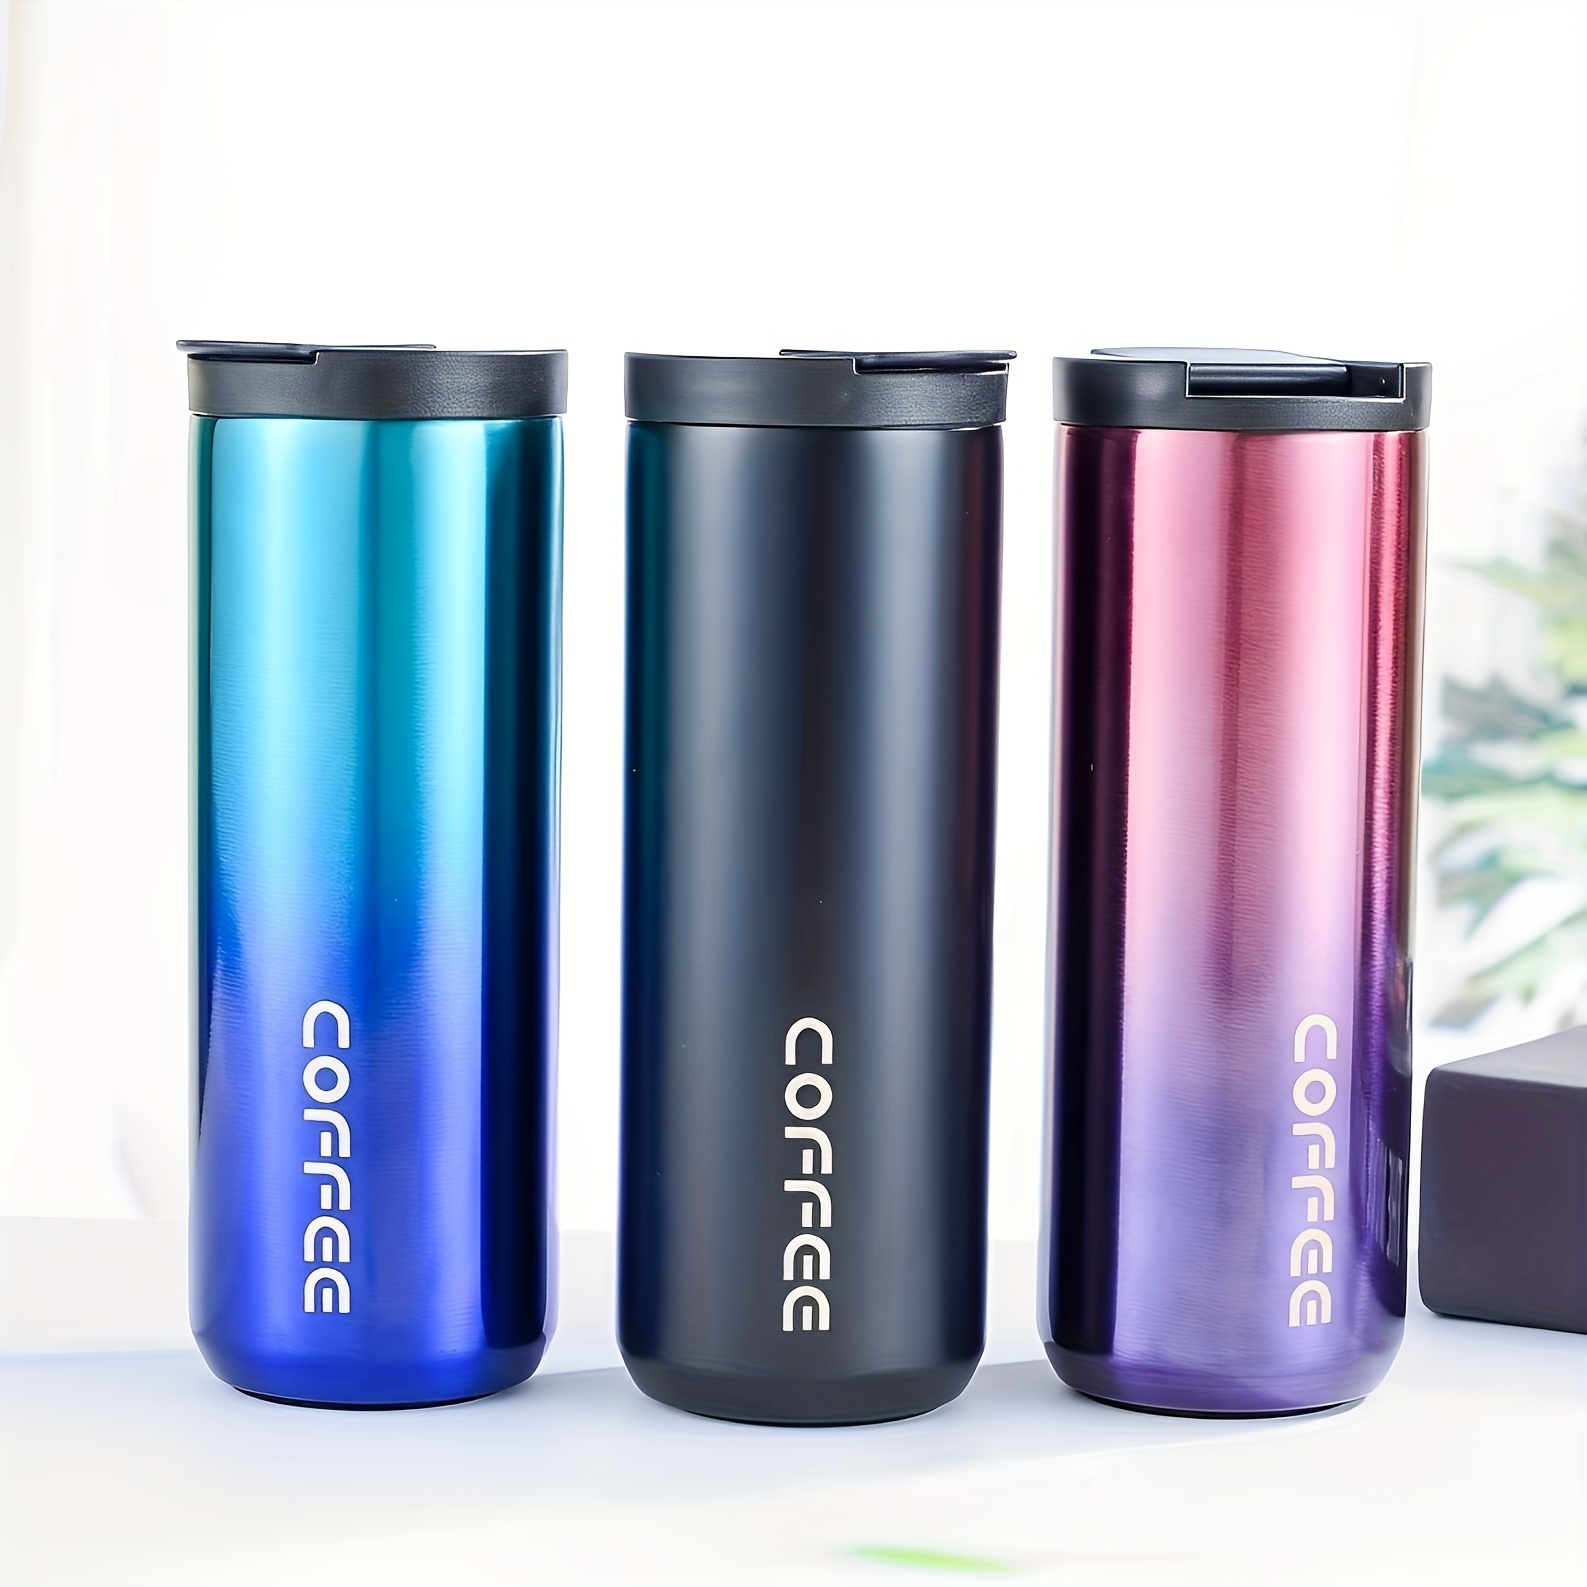  The Better Home Insulated Flask 500ml with Tea / Coffee Cup, Thermos  Flask 500ml, Coffee Flask & Tea Flask for Home & Office Use